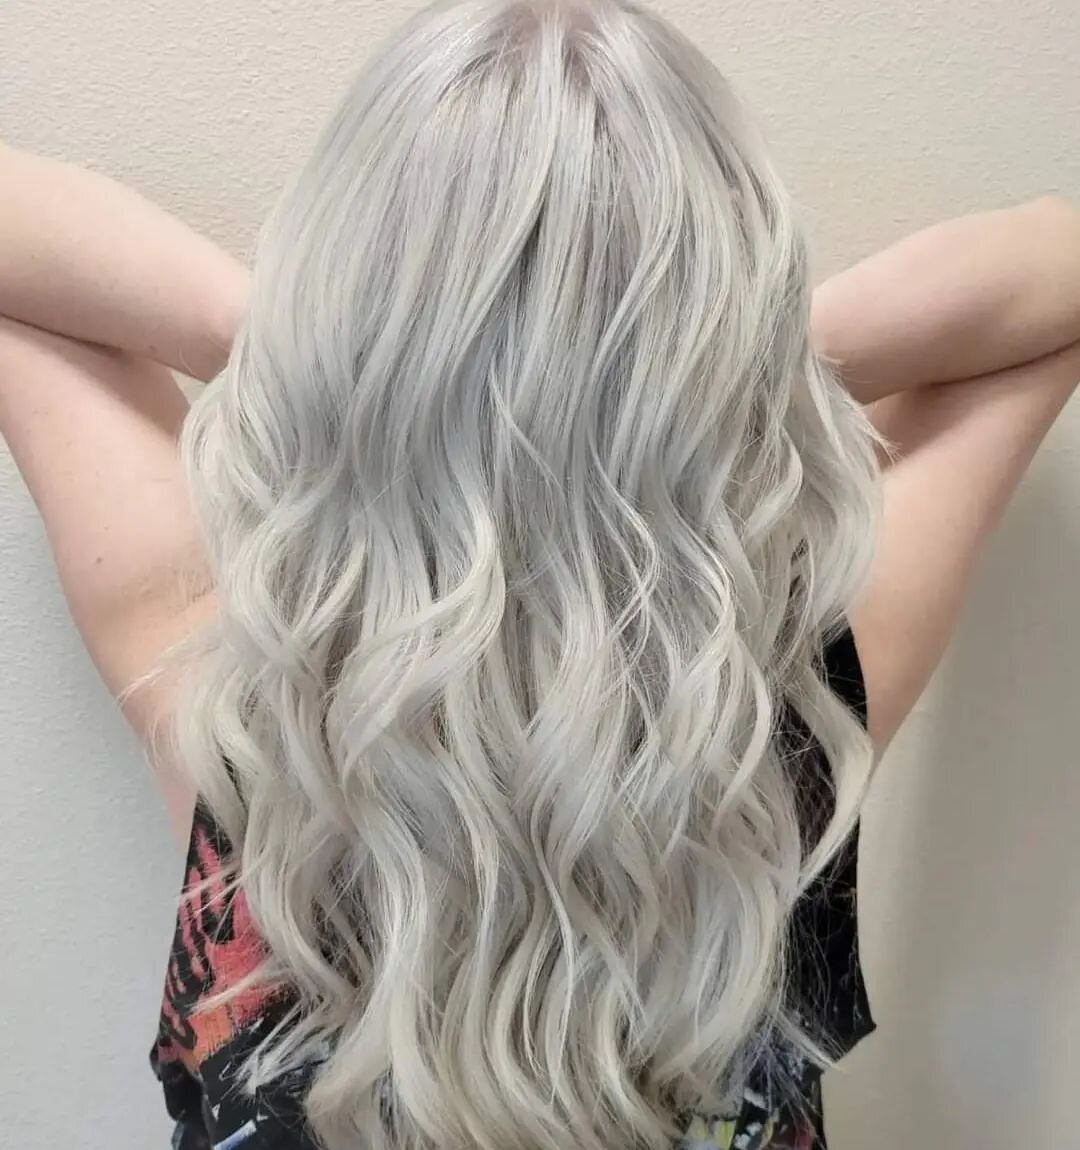 PLATINUM QUEEN!! 👑
Root and Tone maintenance on this Platinum Beauty! 🤍
♡
♡
Booking up quickly for Spring! Shoot me a text to book your appointment!
☎️ 720-839-3465 
♡
♡
#postinthrees #realpeople #chicksthatrock #stylistssupportingstylists #allshad